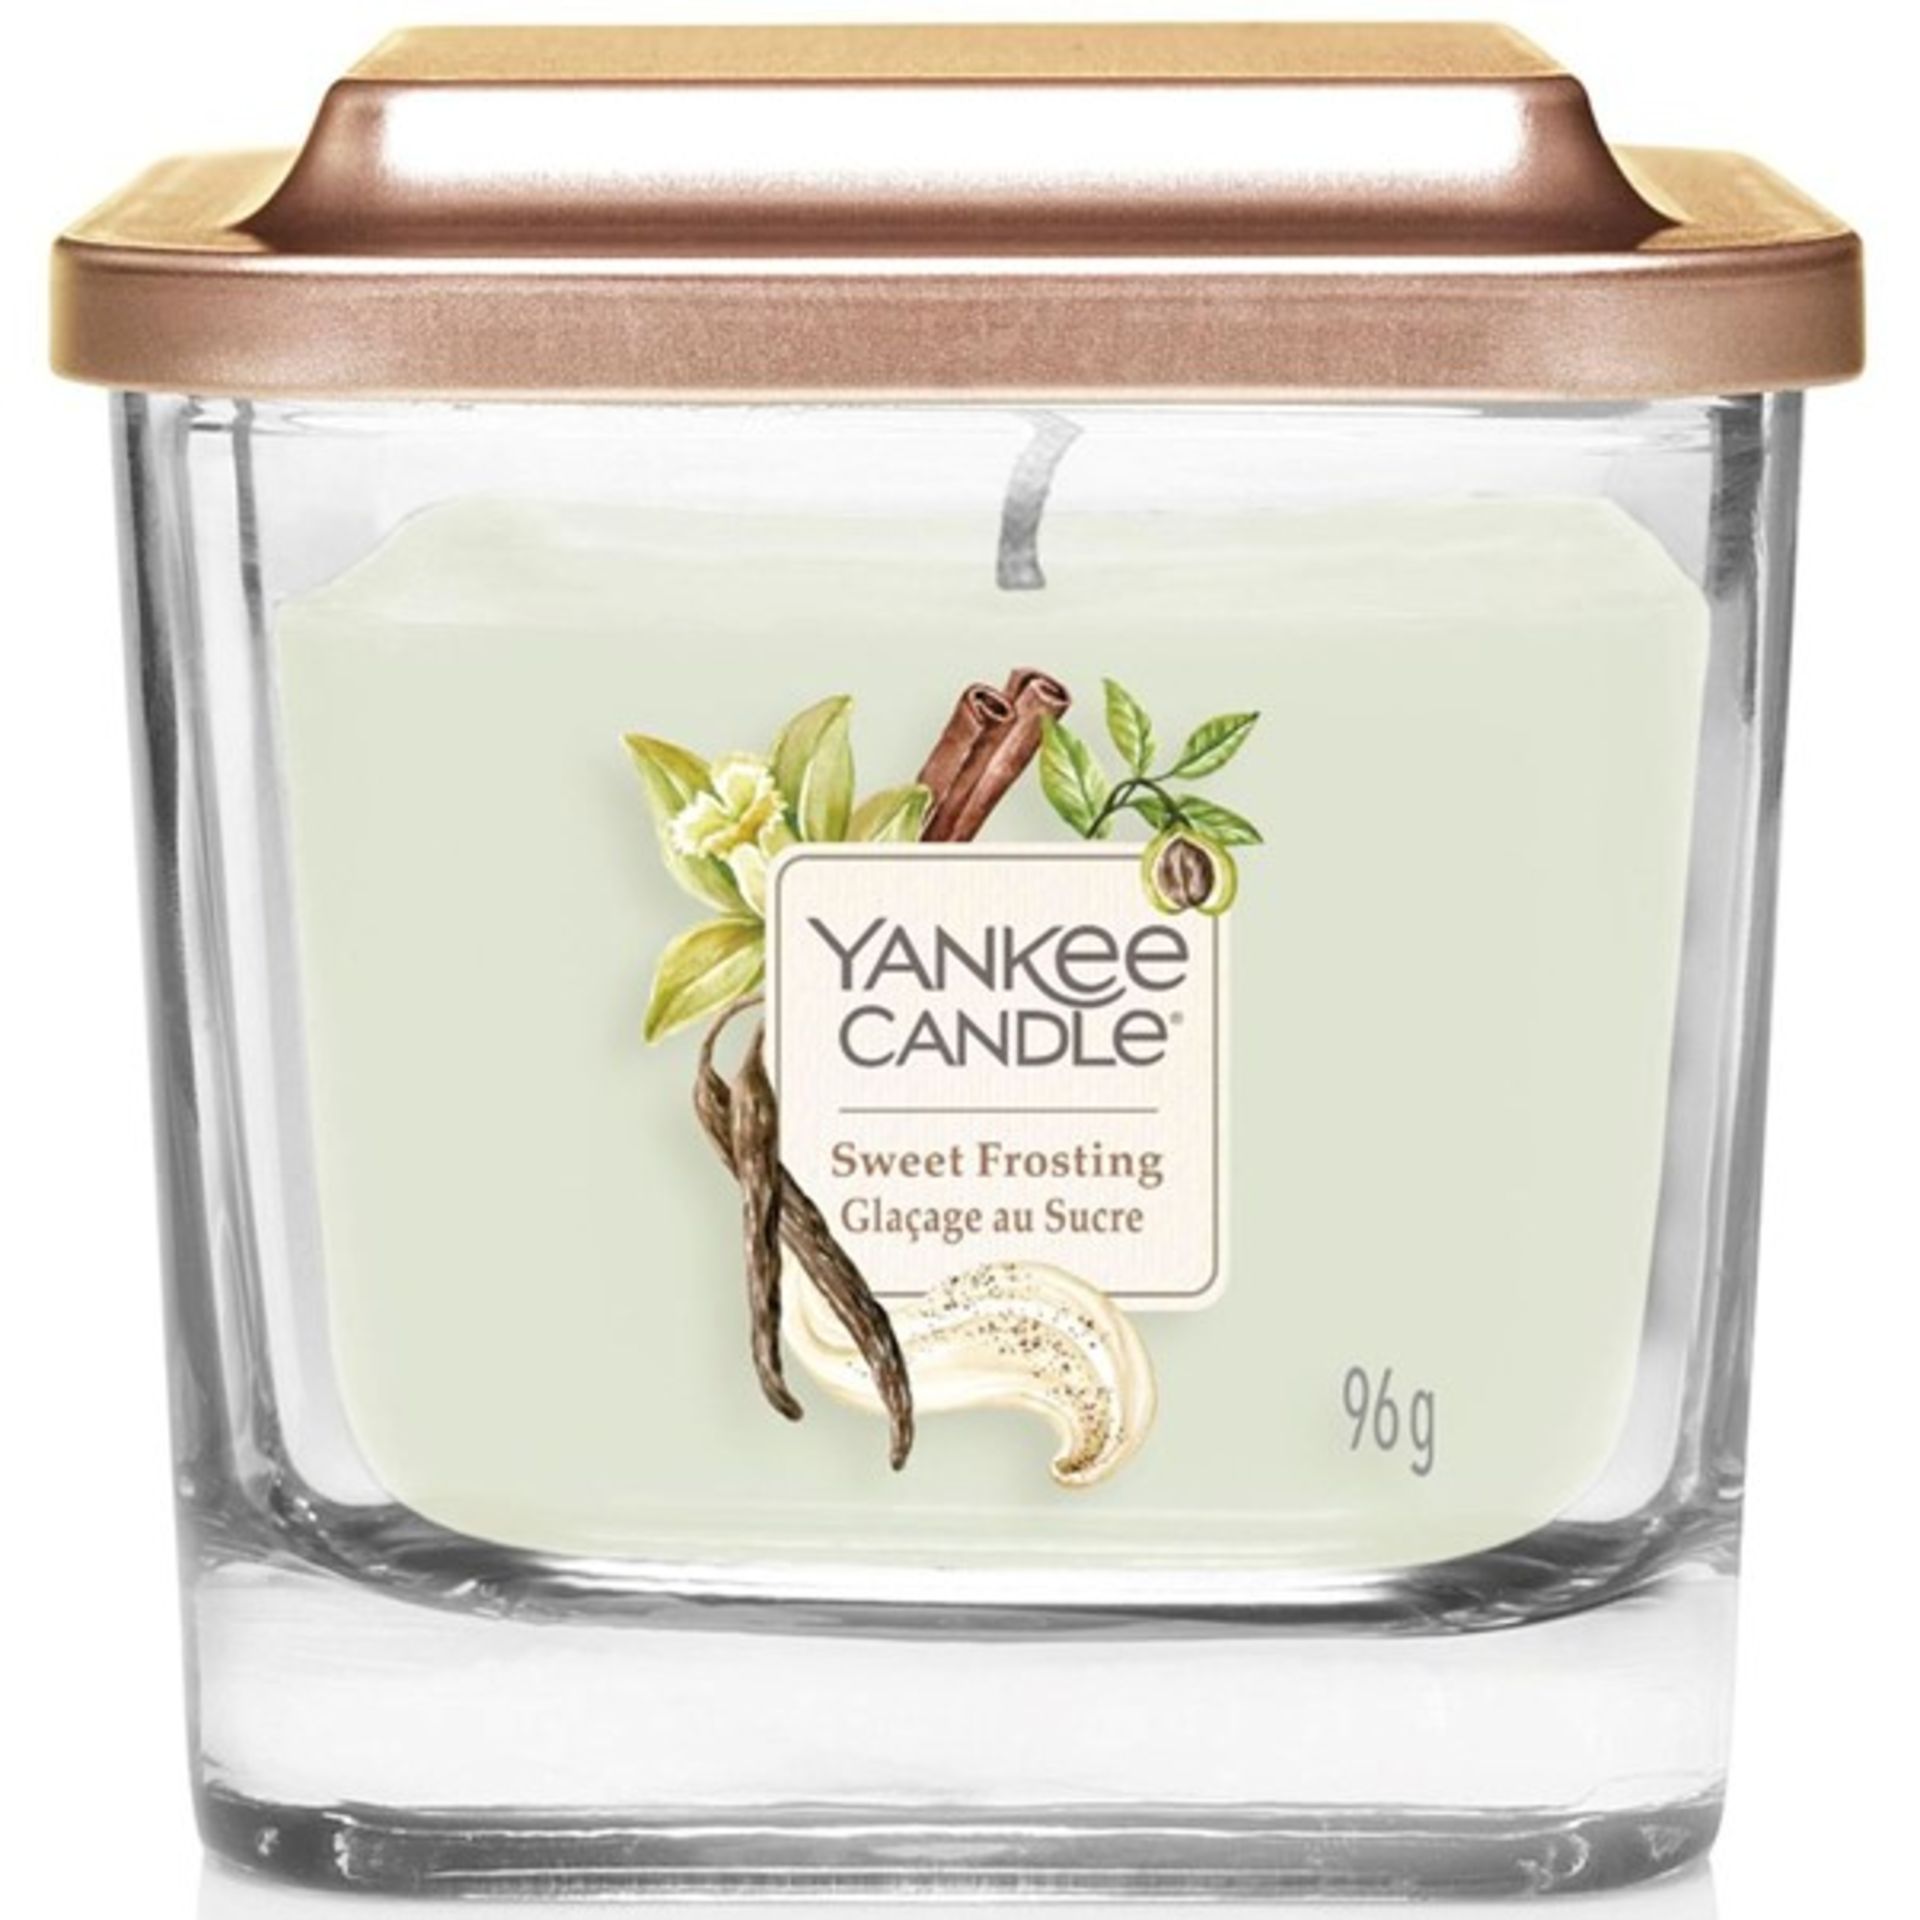 RRP £9.99 - New 96g Sweet Frosting Yankee Candle